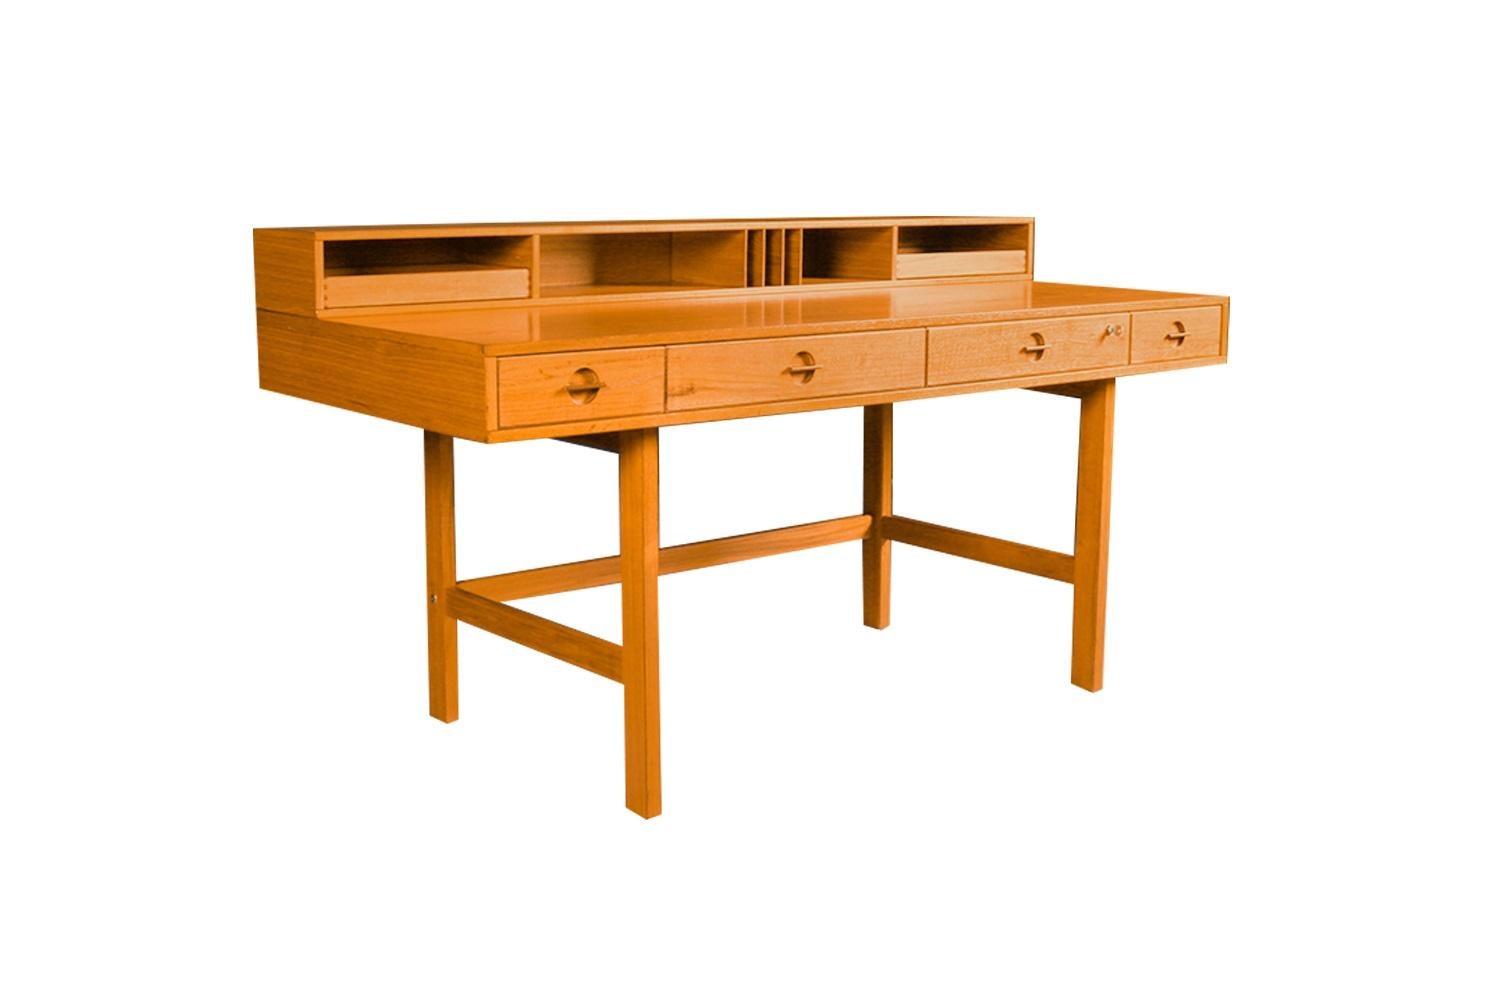 Fabulous highly collectible Danish Modern, mid century expandable, desk/table, designed by Jens Quistgaard of Dansk for Peter Løvig Nielsen, circa 1960s. A remarkable statement of quality in design executed to last the test of time, finely crafted